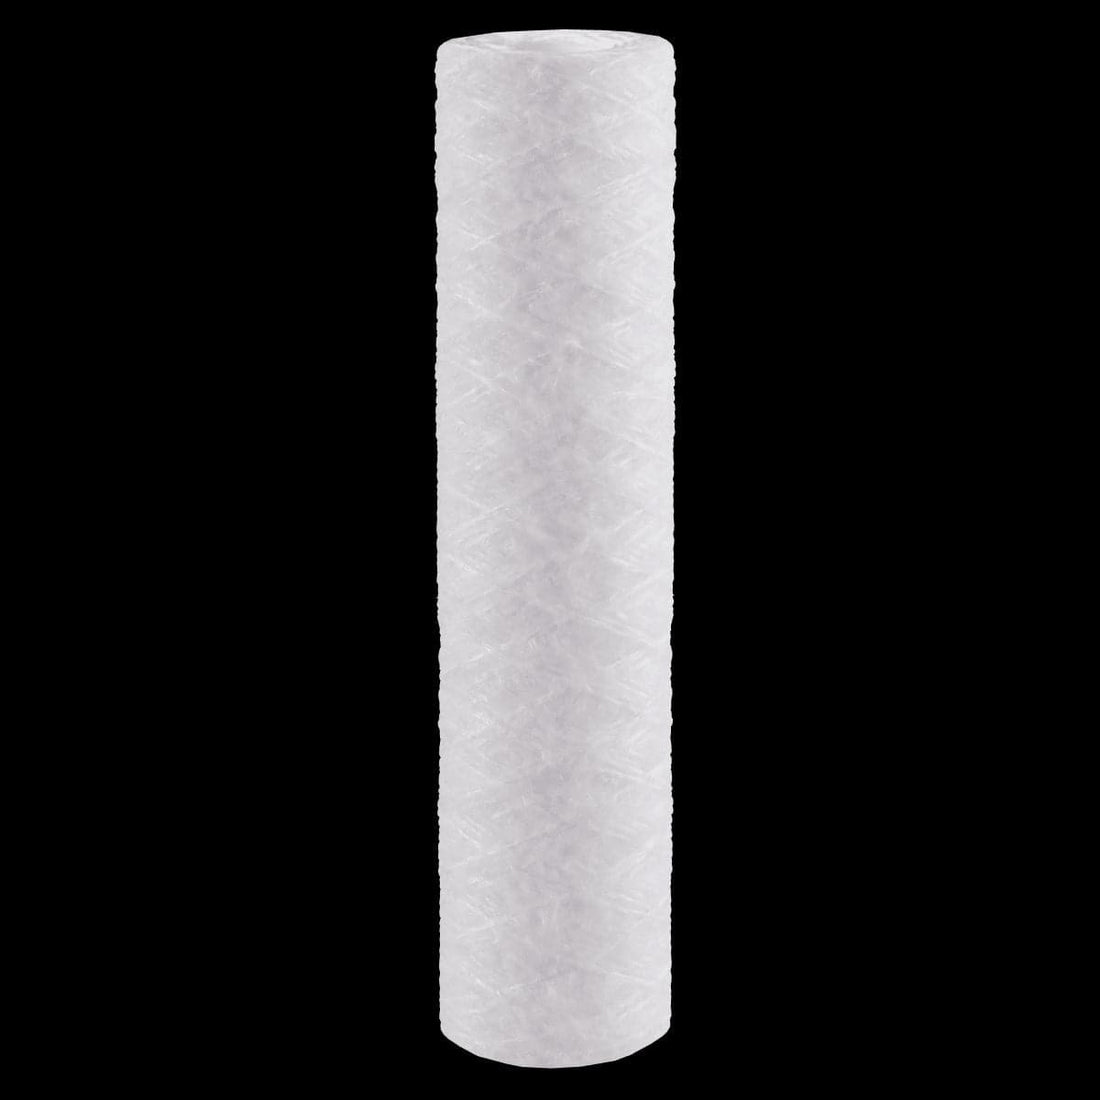 POLYPROPYLENE COIL FILTER CARTRIDGE. SL10 SIZE. REMOVES PARTICLES OF - best price from Maltashopper.com BR430002913